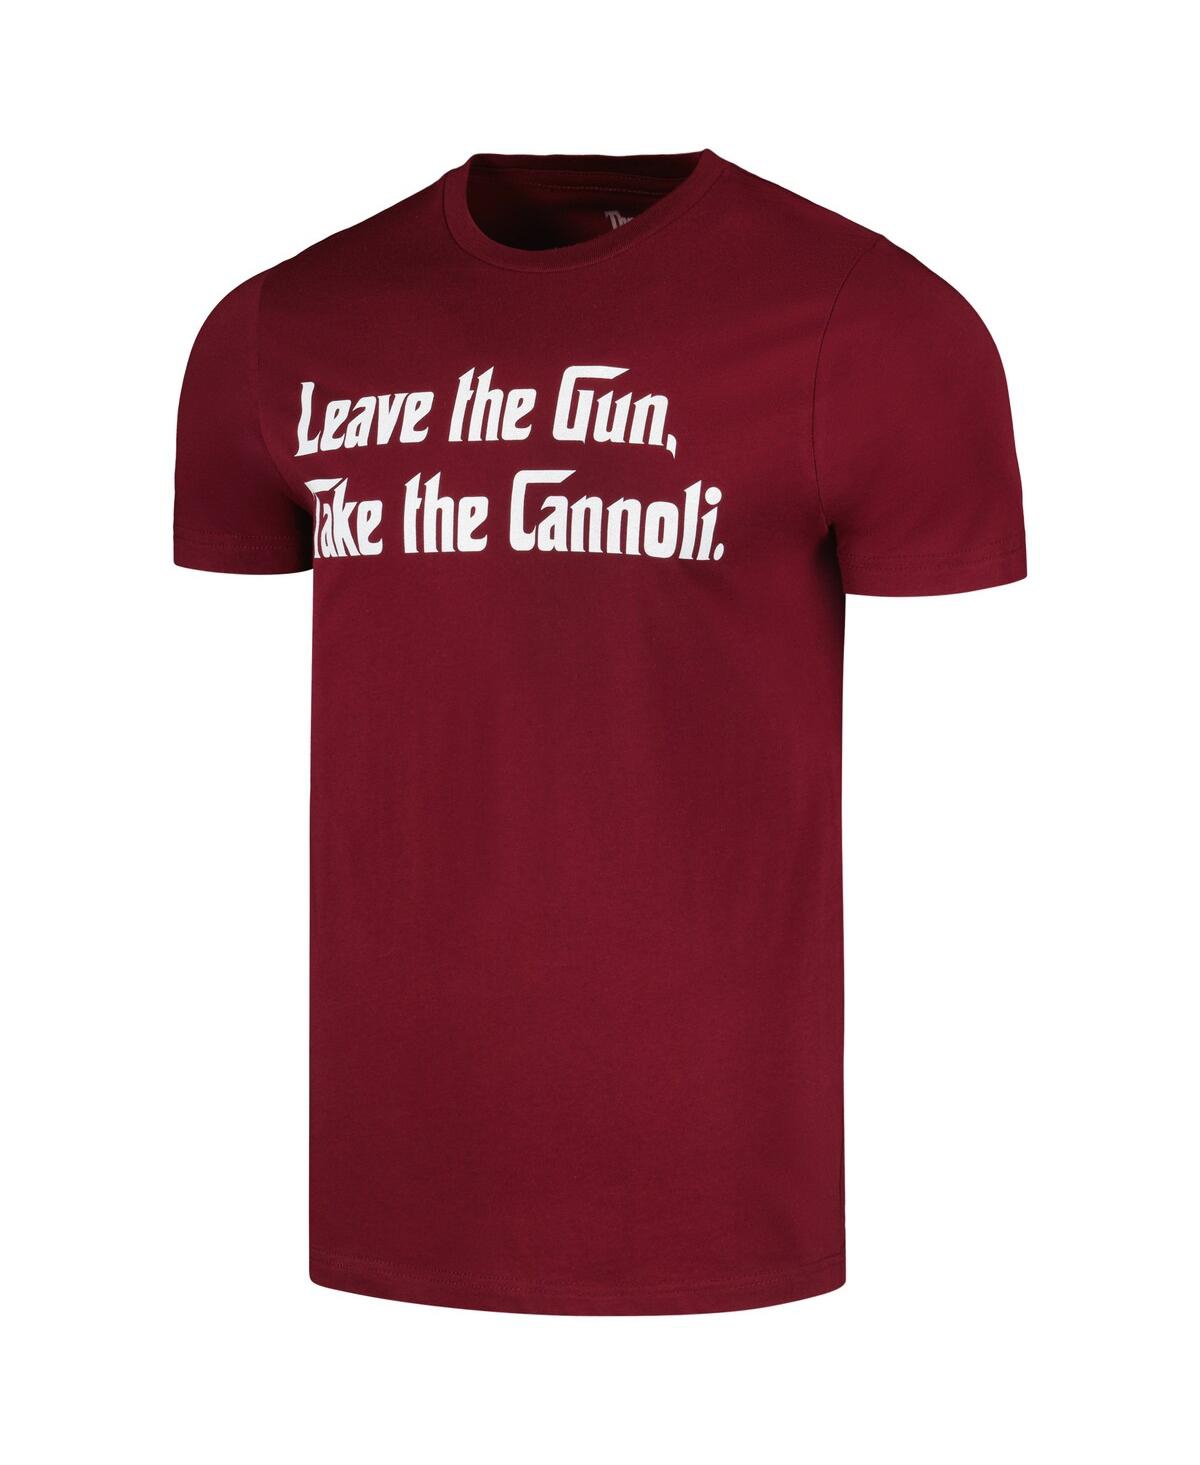 Shop Contenders Clothing Men's And Women's  Red The Godfather The Cannoli T-shirt